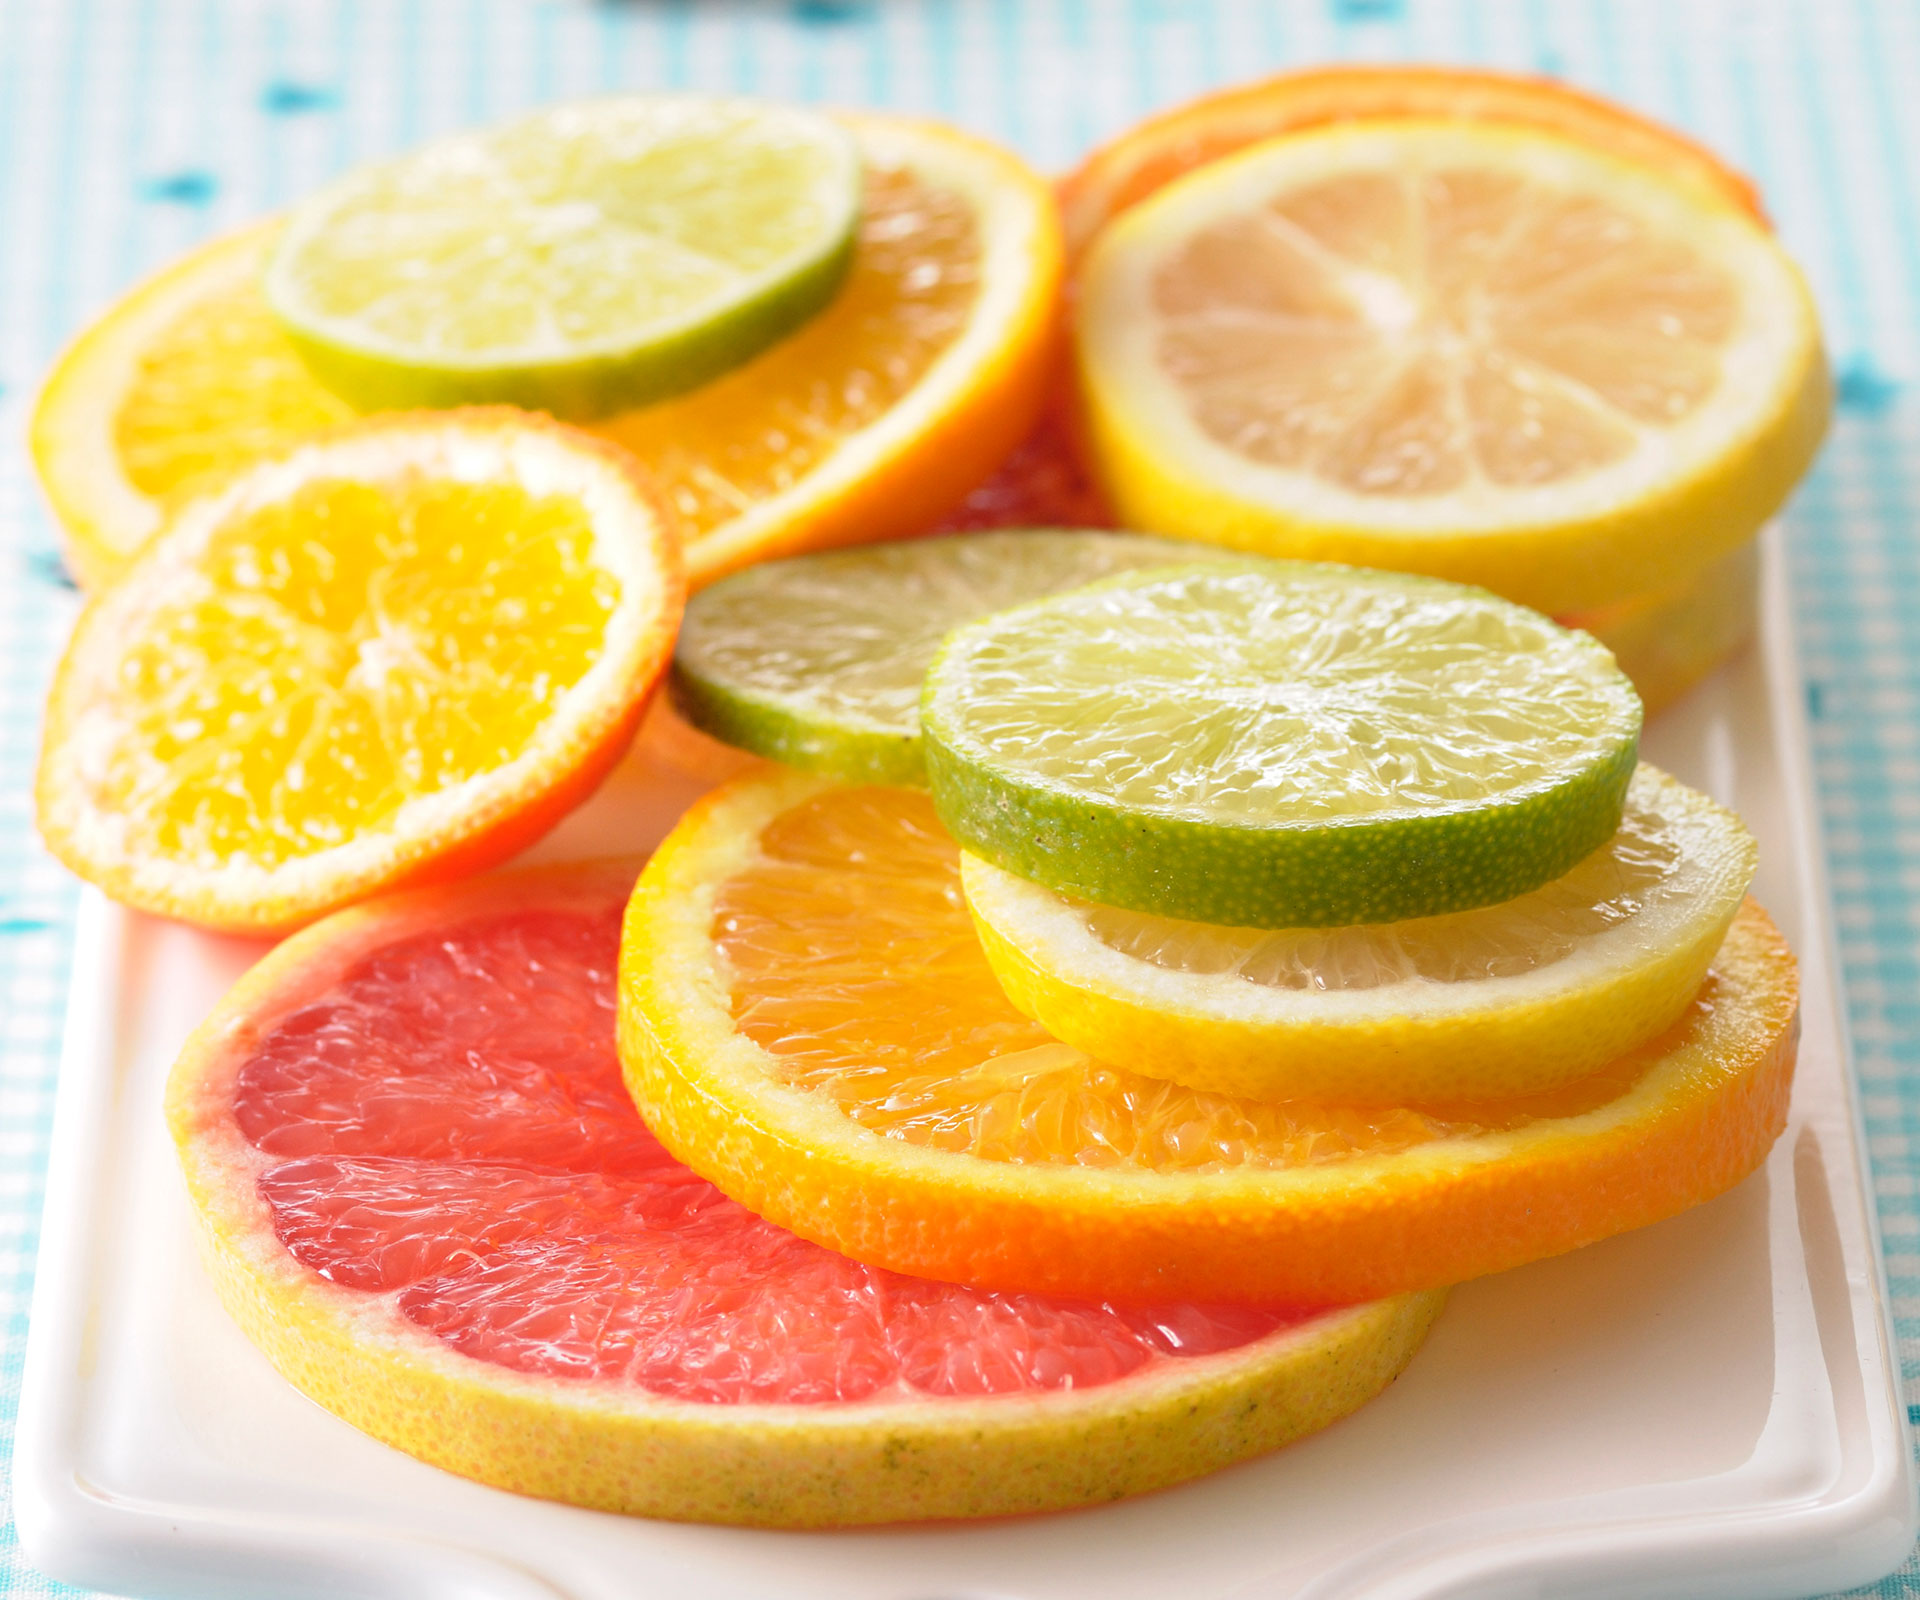 There are many useful health properties of organic citrus oils.